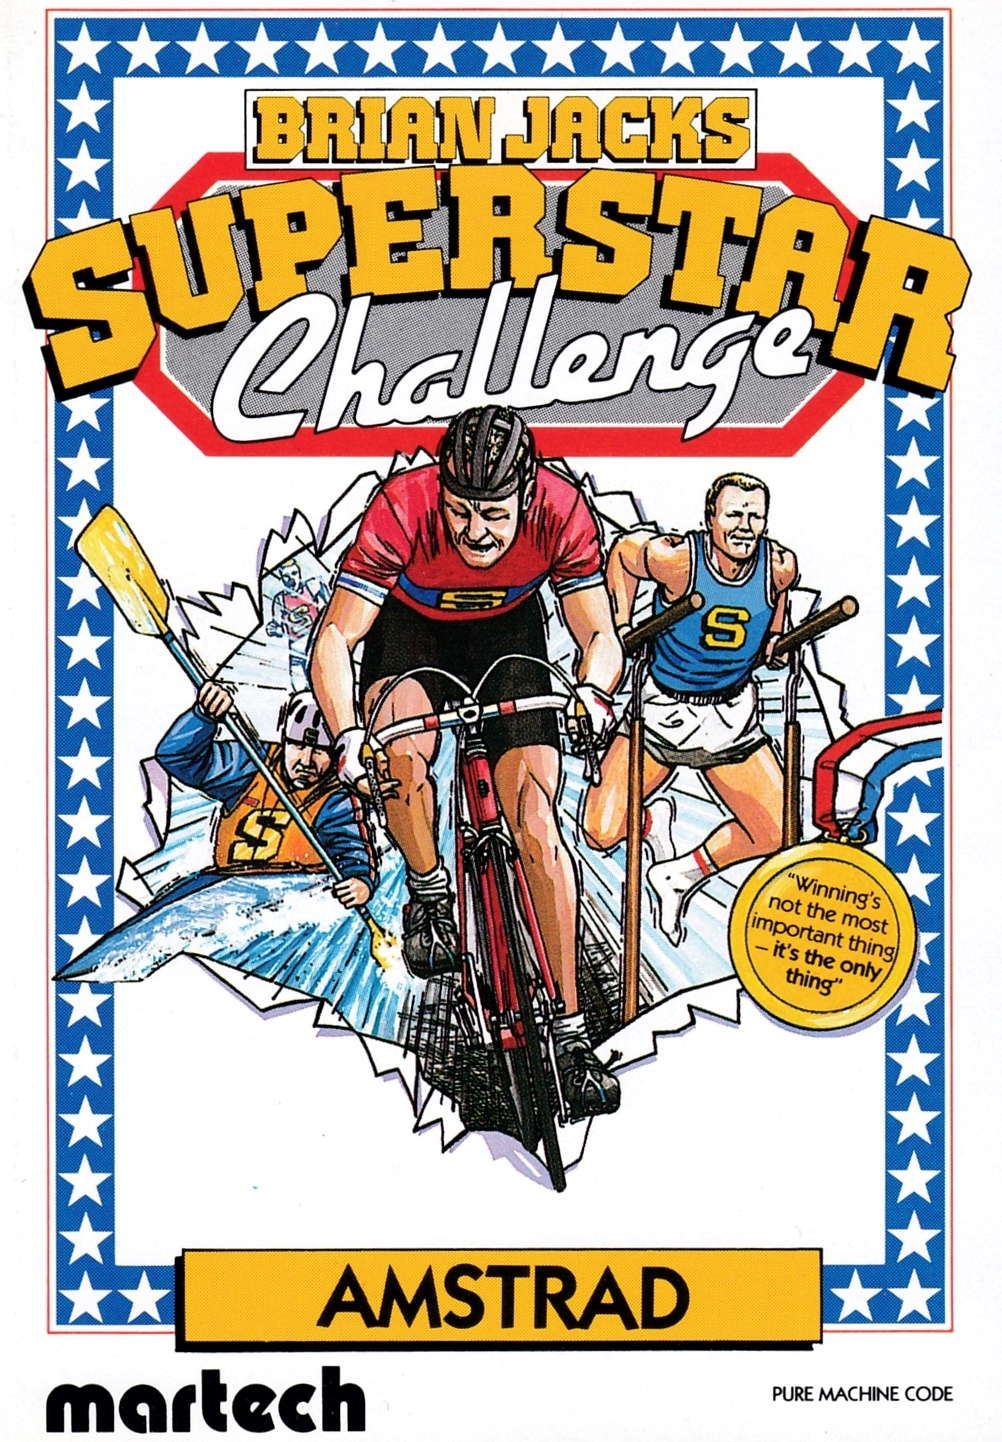 cover of the Amstrad CPC game Brian Jacks Superstar Challenge  by GameBase CPC